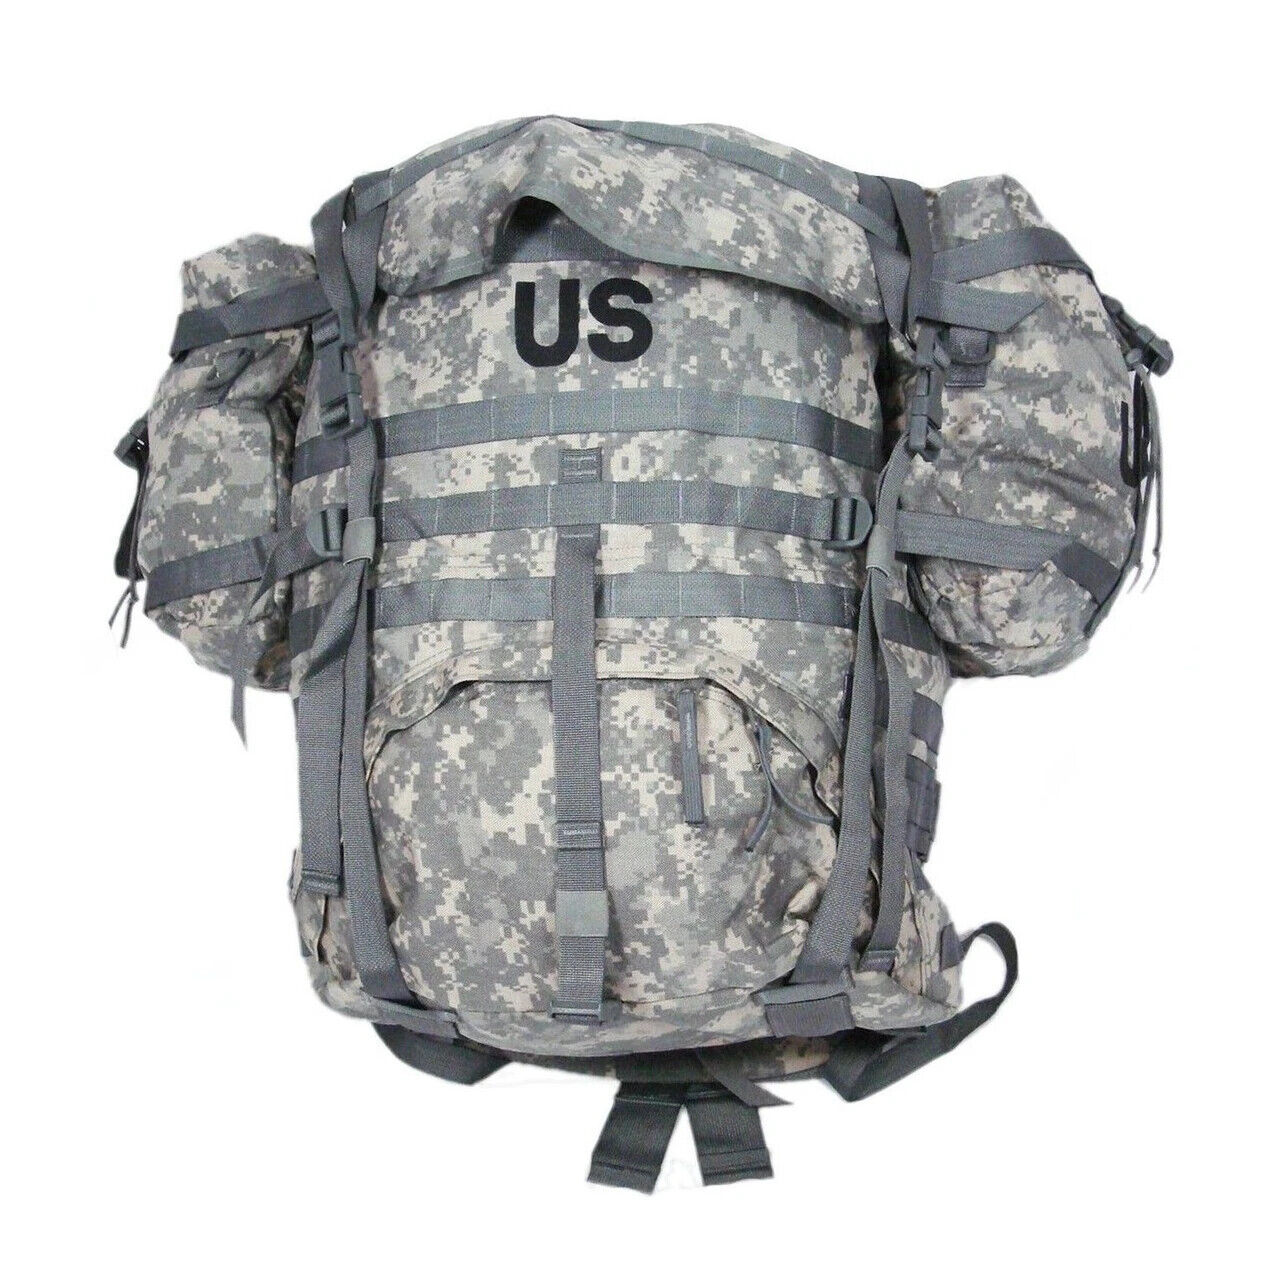 USGI MOLLE II ACU Large Field Pack Rucksack Complete w/ Sustainment Pouches